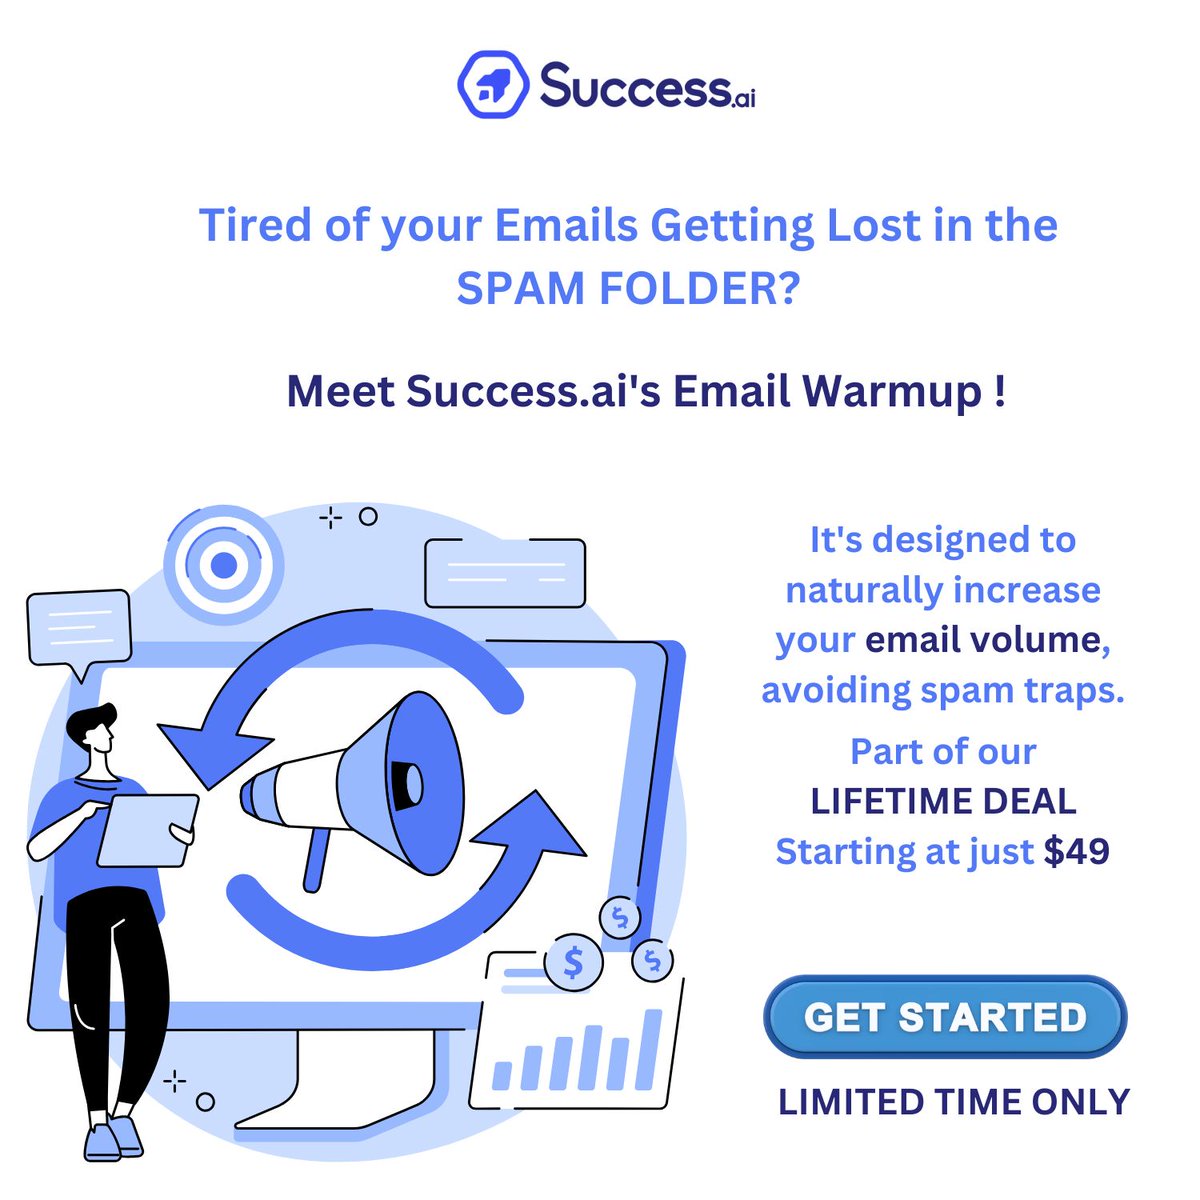 Tired of emails landing in SPAM?Try Success.ai's Email Warmup!  Activate with one click, track progress with a live dashboard, and naturally increase email volume. LIFETIME DEAL starting at $49! Limited time only: appsumo.com/products/succe… #B2BEmailMarketing #SuccessAI